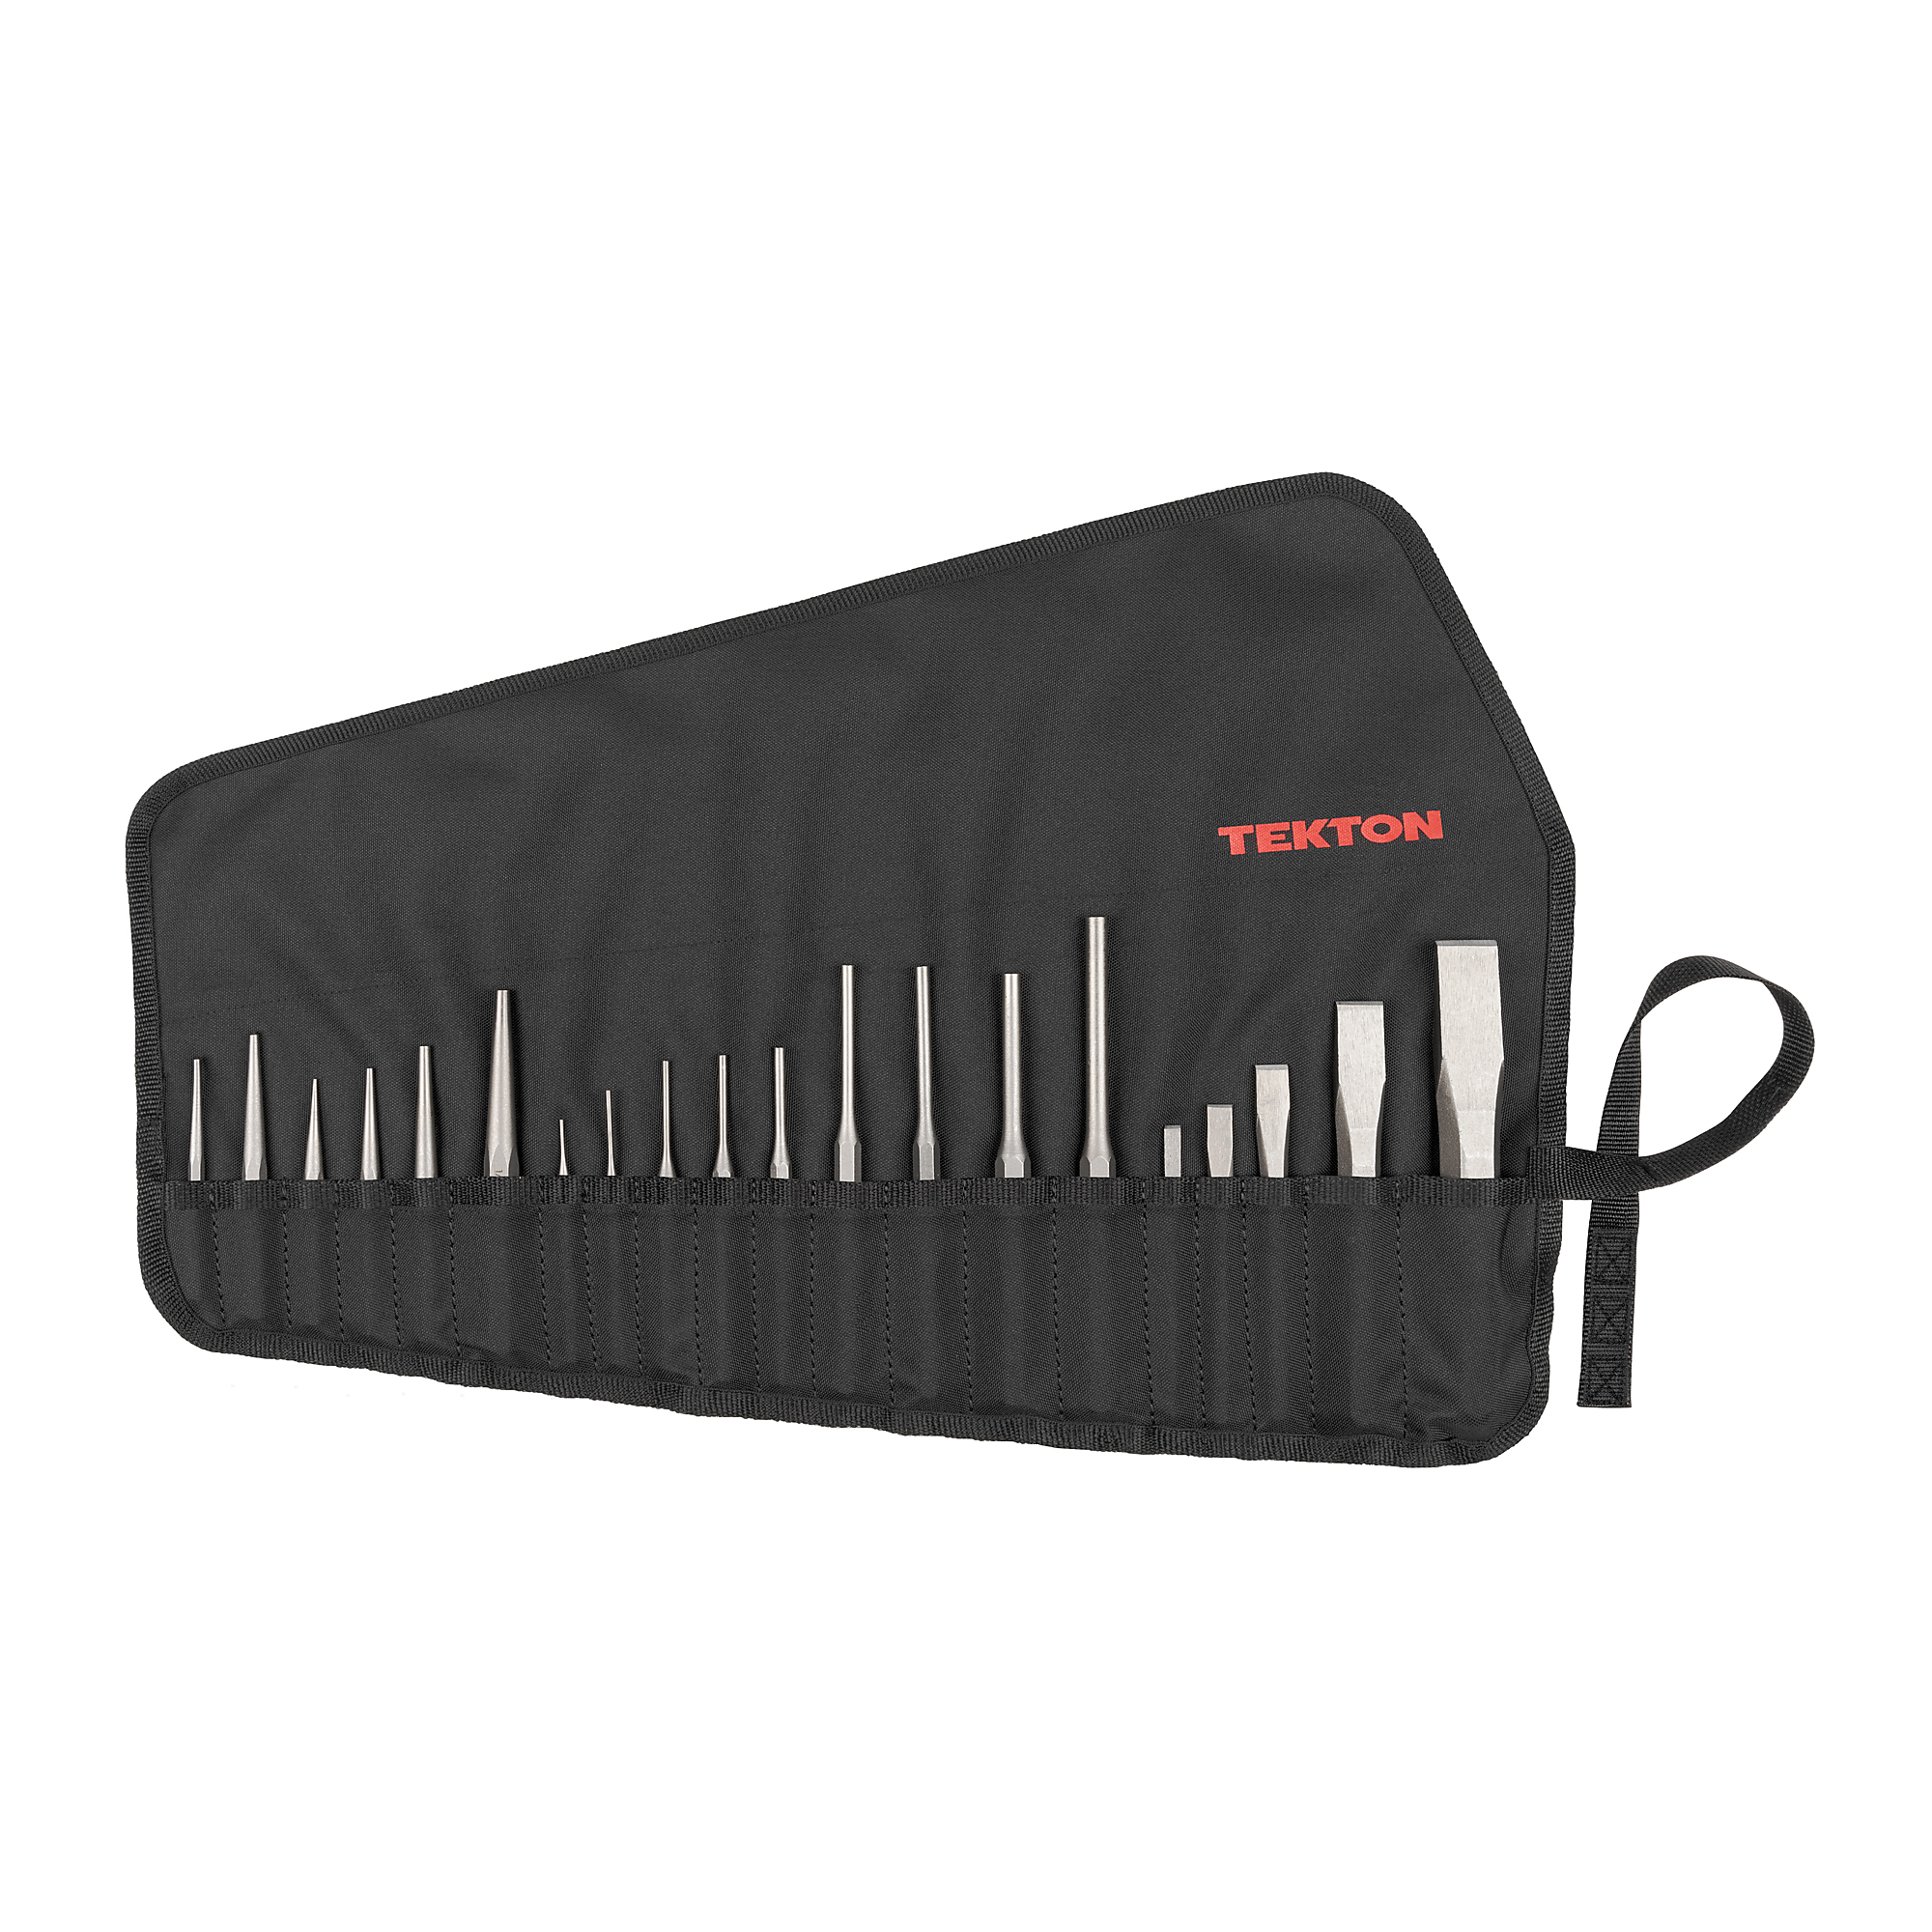 Tekton, 20-Piece Punch and Chisel Set with Pouch, Product Type Punch/Chisel Set, Pieces (qty.) 20 Model PNC99101